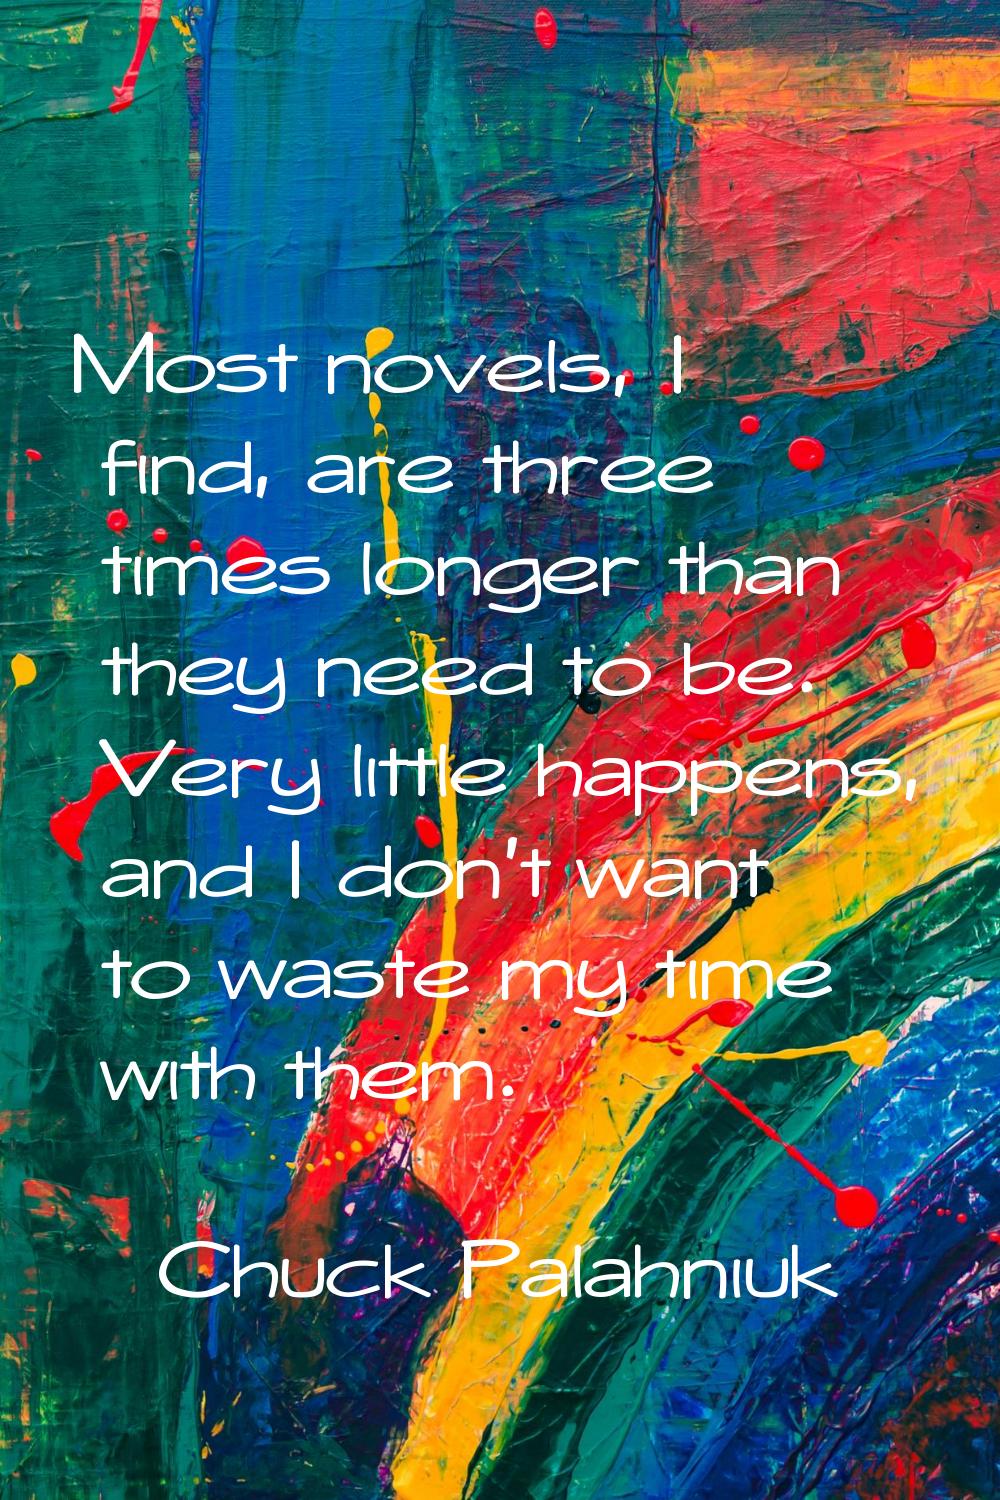 Most novels, I find, are three times longer than they need to be. Very little happens, and I don't 